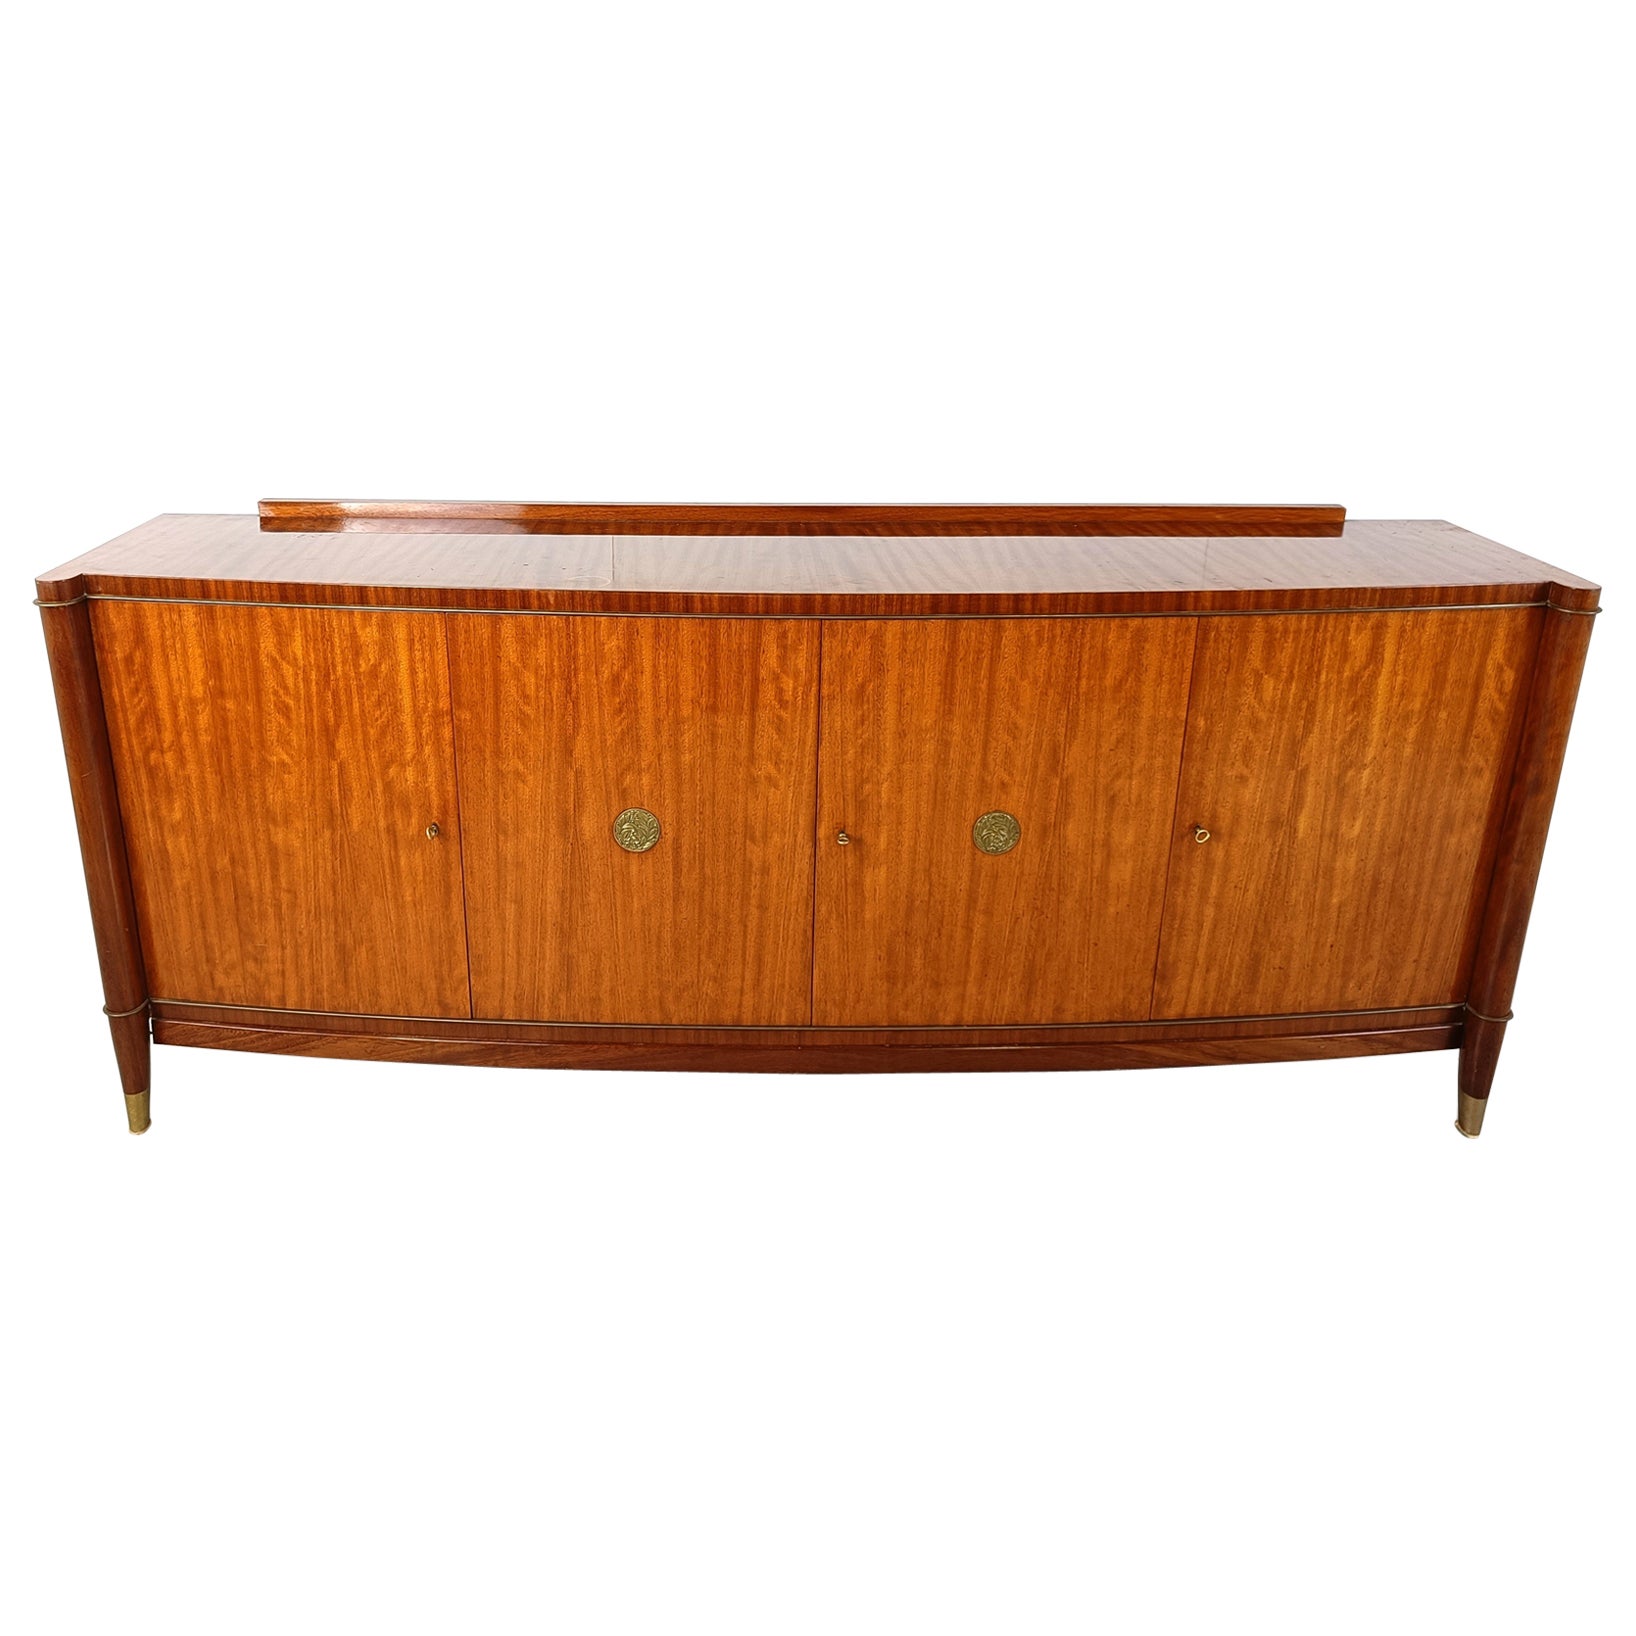 Art deco 'Voltaire' sideboard by Decoene Frères, 1950s For Sale